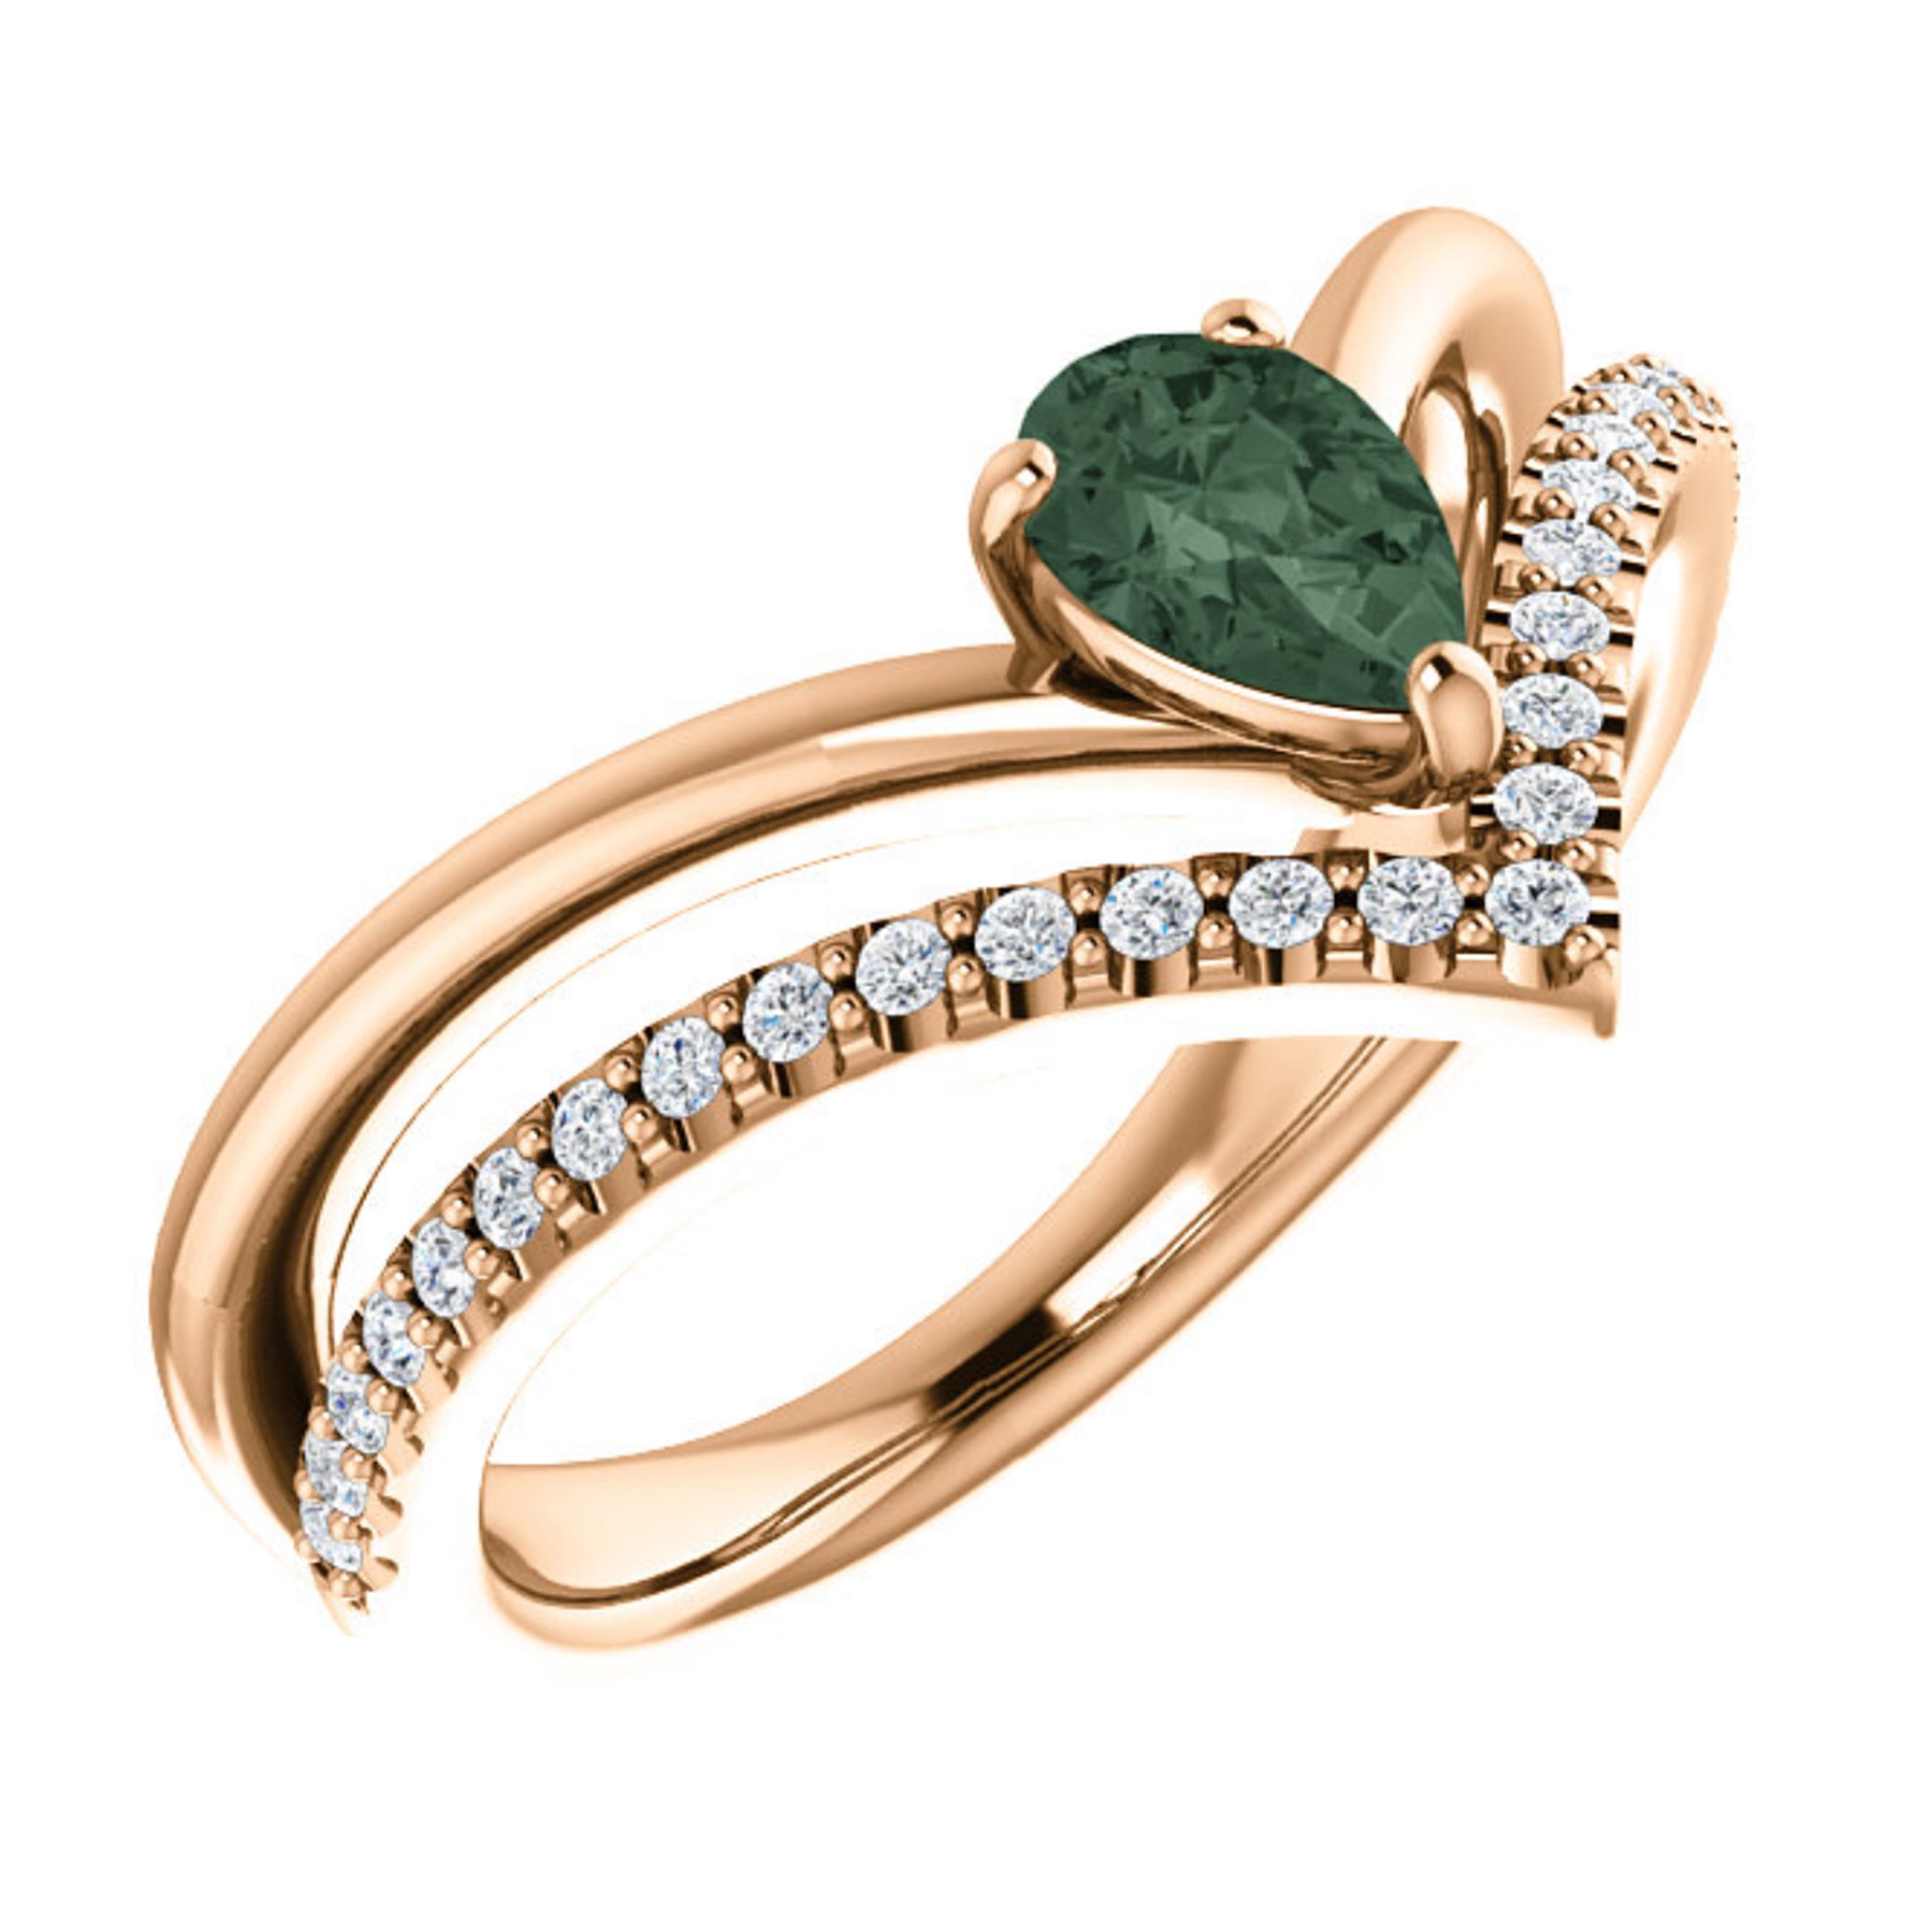 Alexandrite and Diamond Double "V" Ring in White, Yellow or Rose Gold - Talisman Collection Fine Jewelers